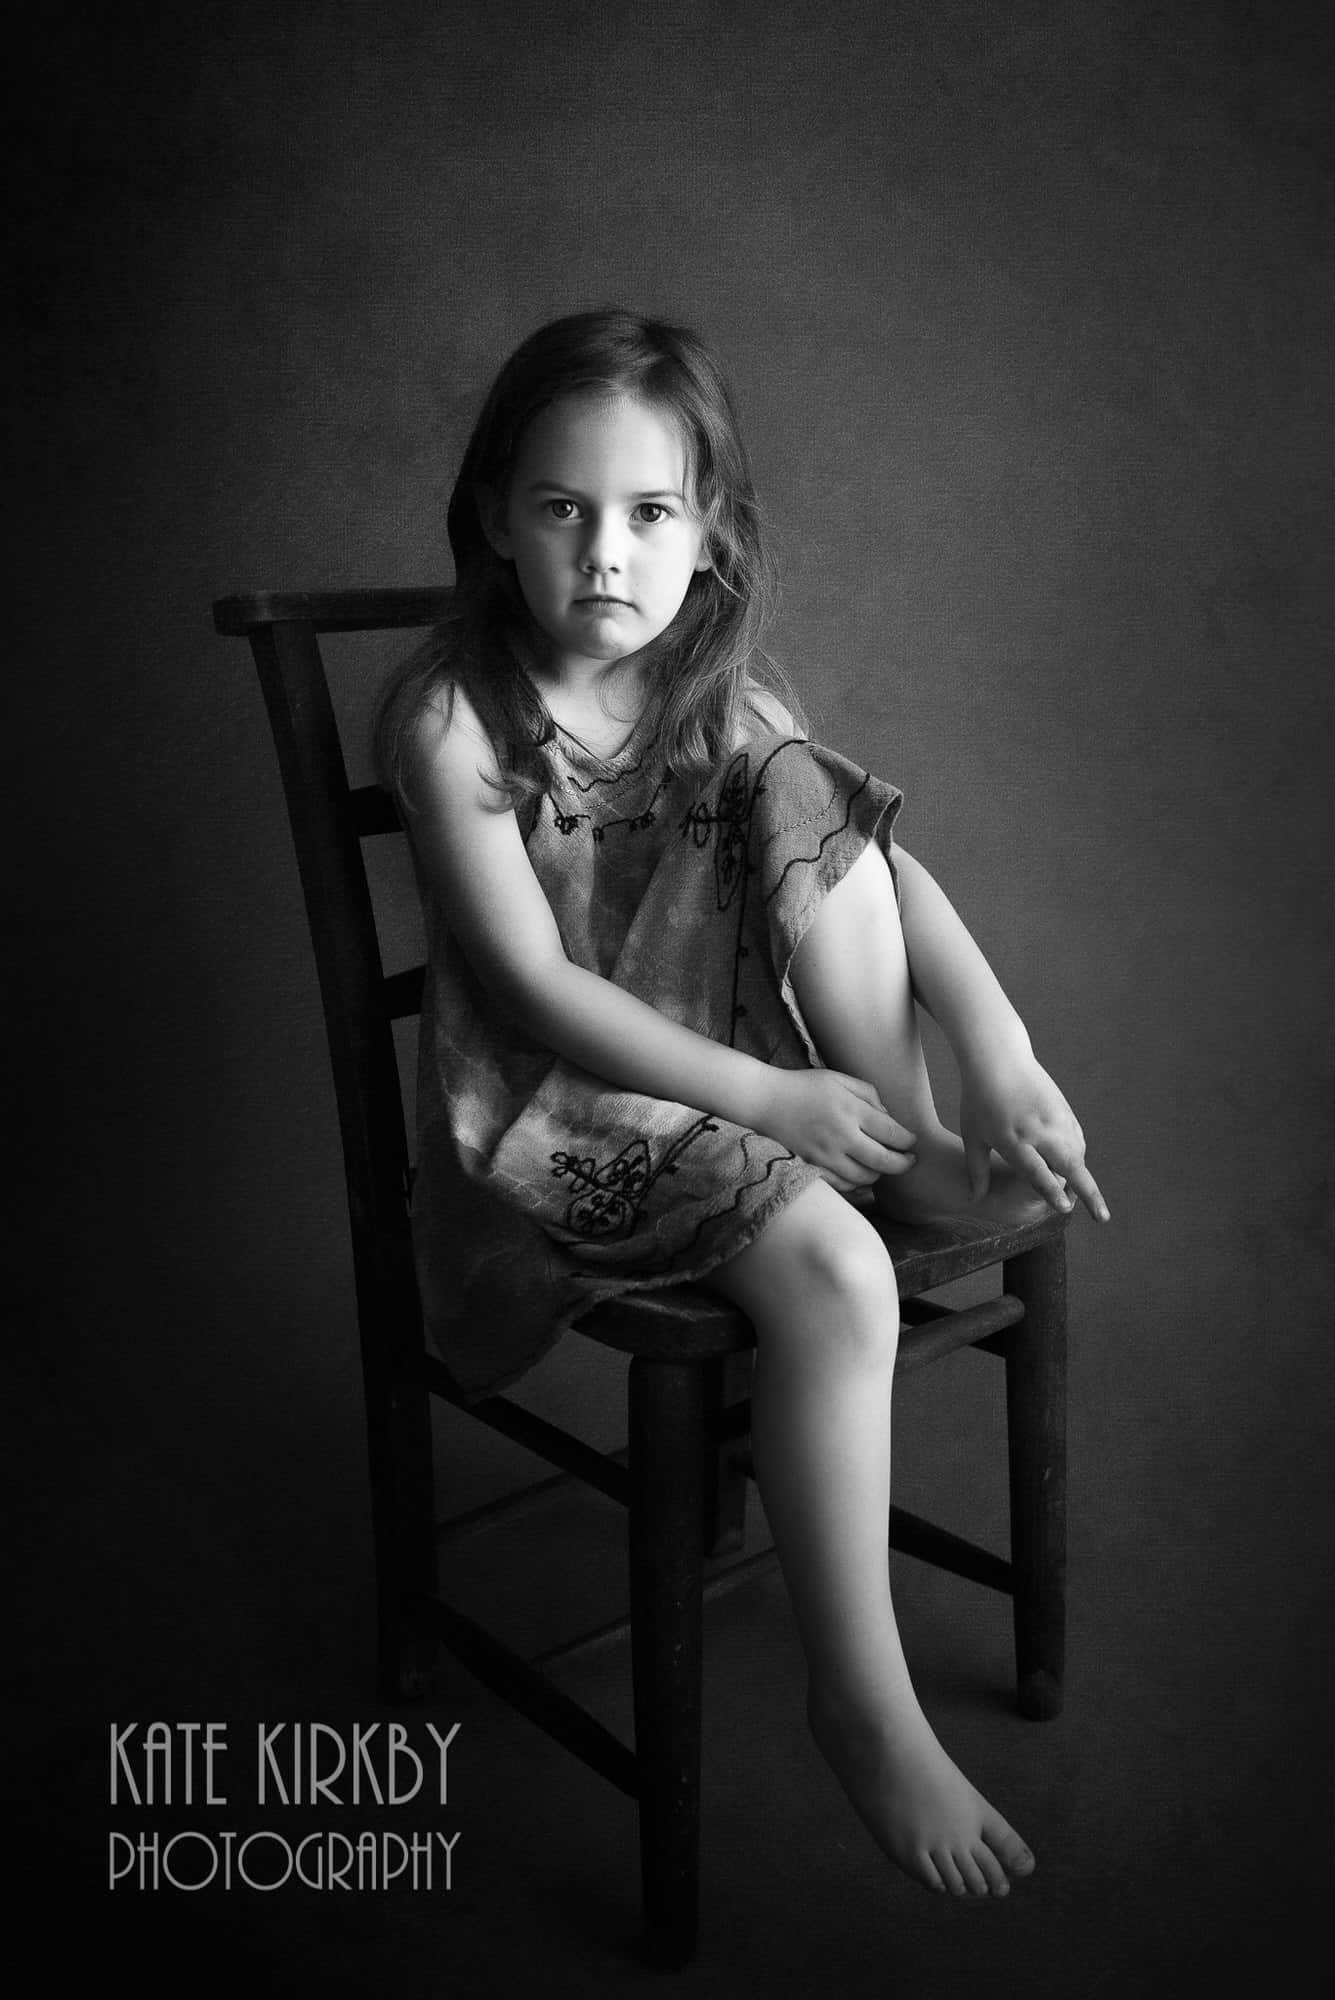 black and white photo of girl sitting on chair looking directly at camera with serious expression